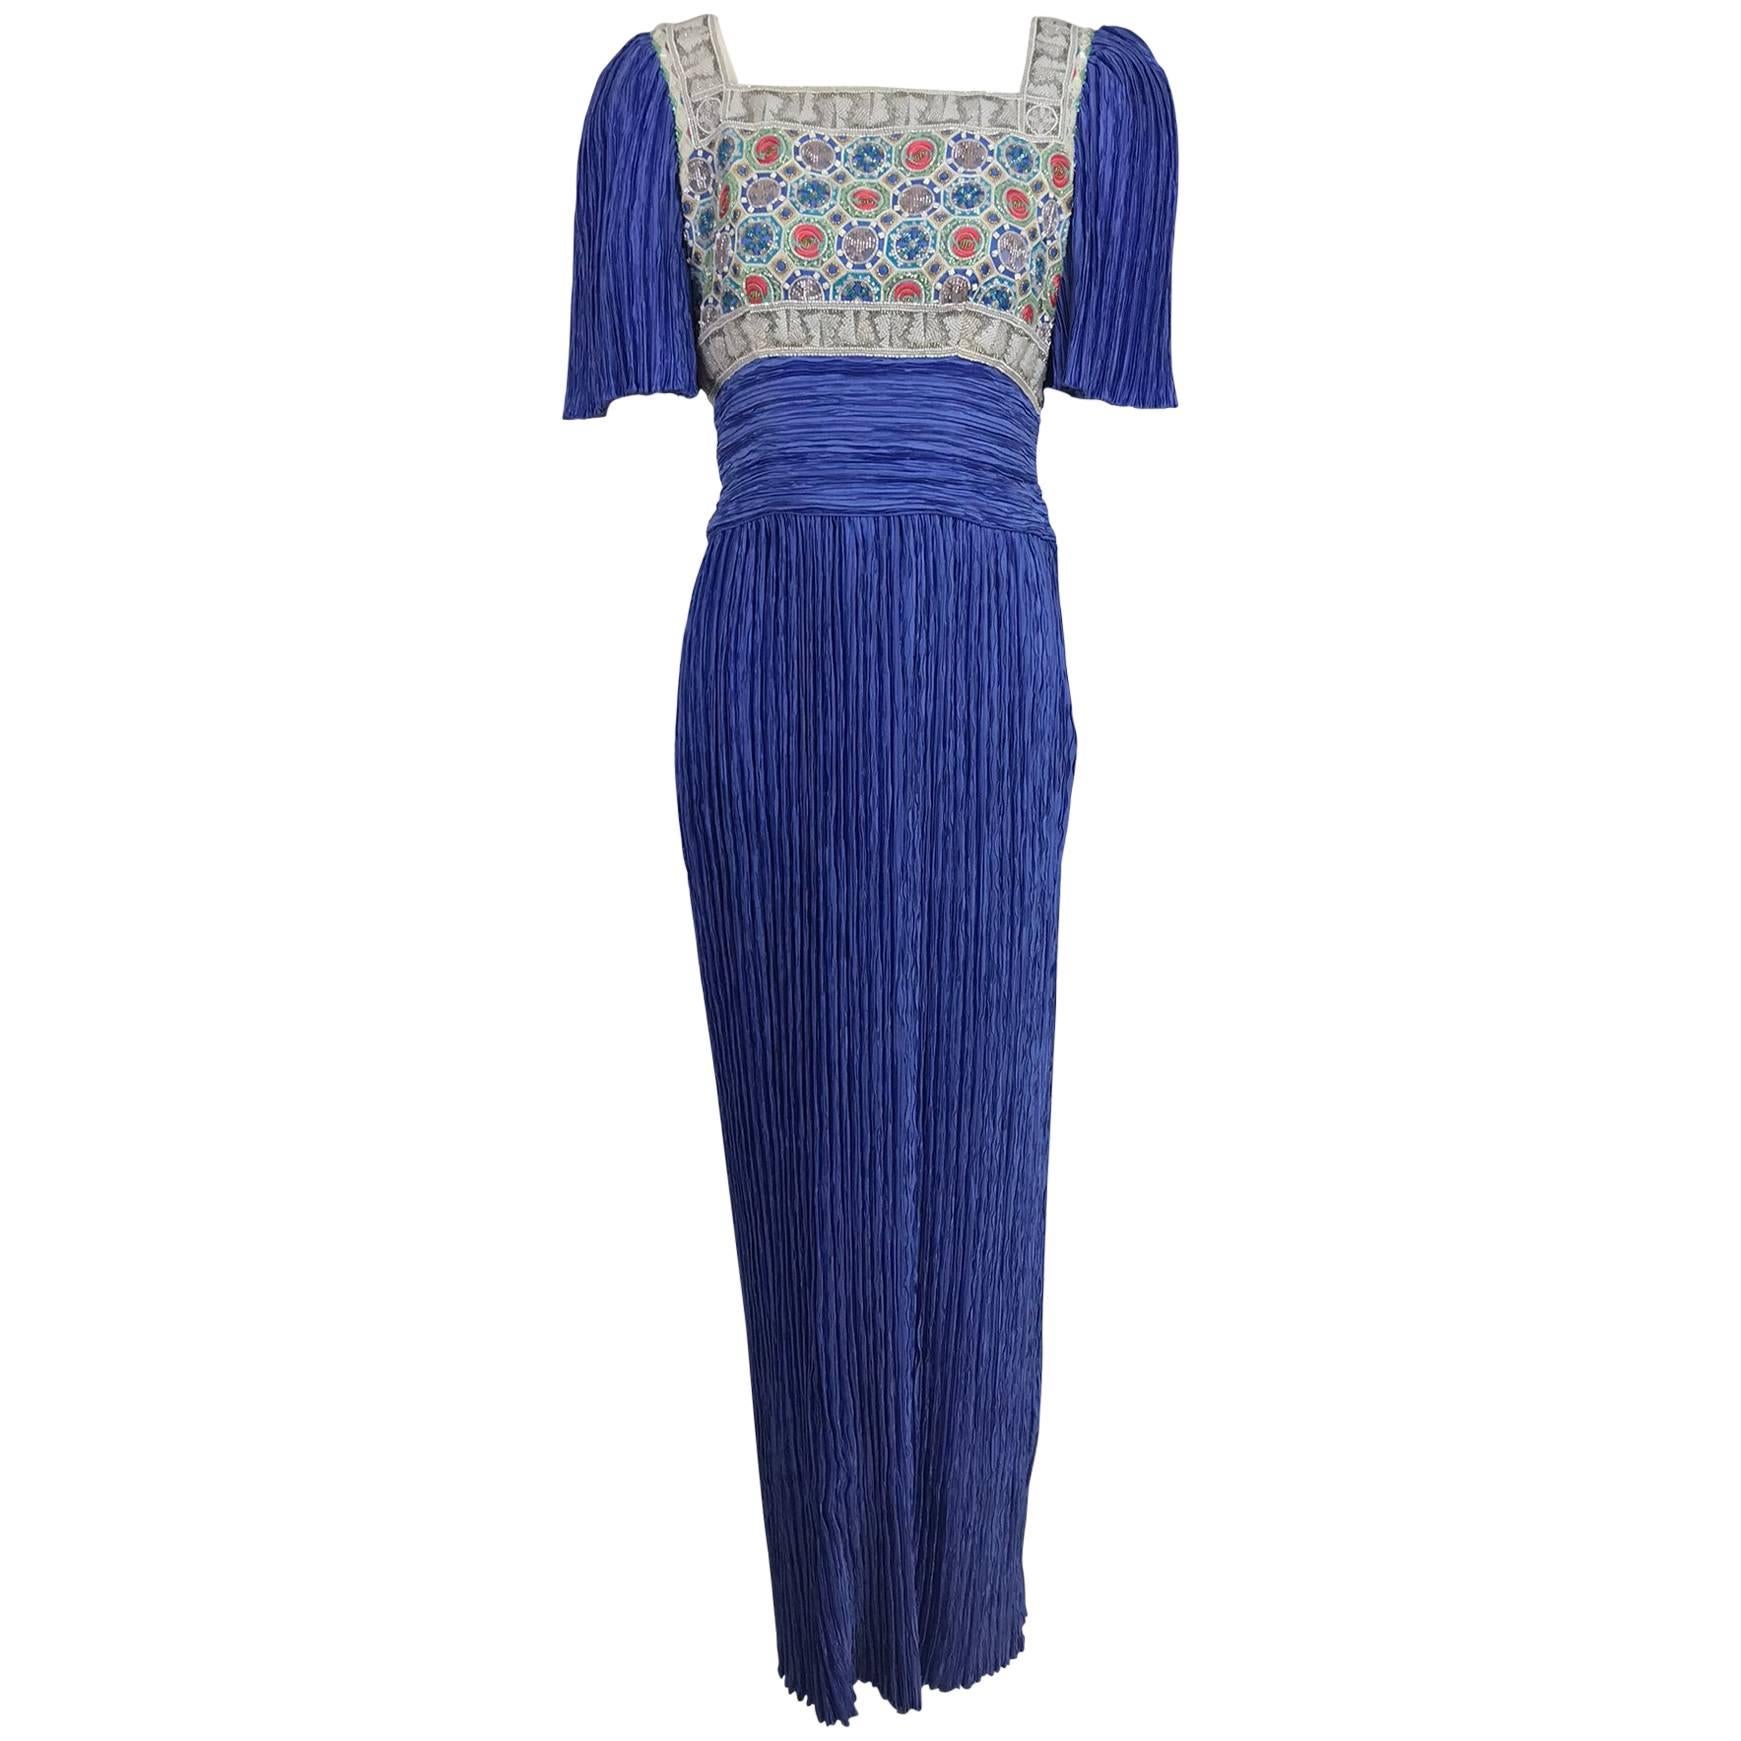 Mary McFadden beaded Fortuny style pleated evening gown 1980s